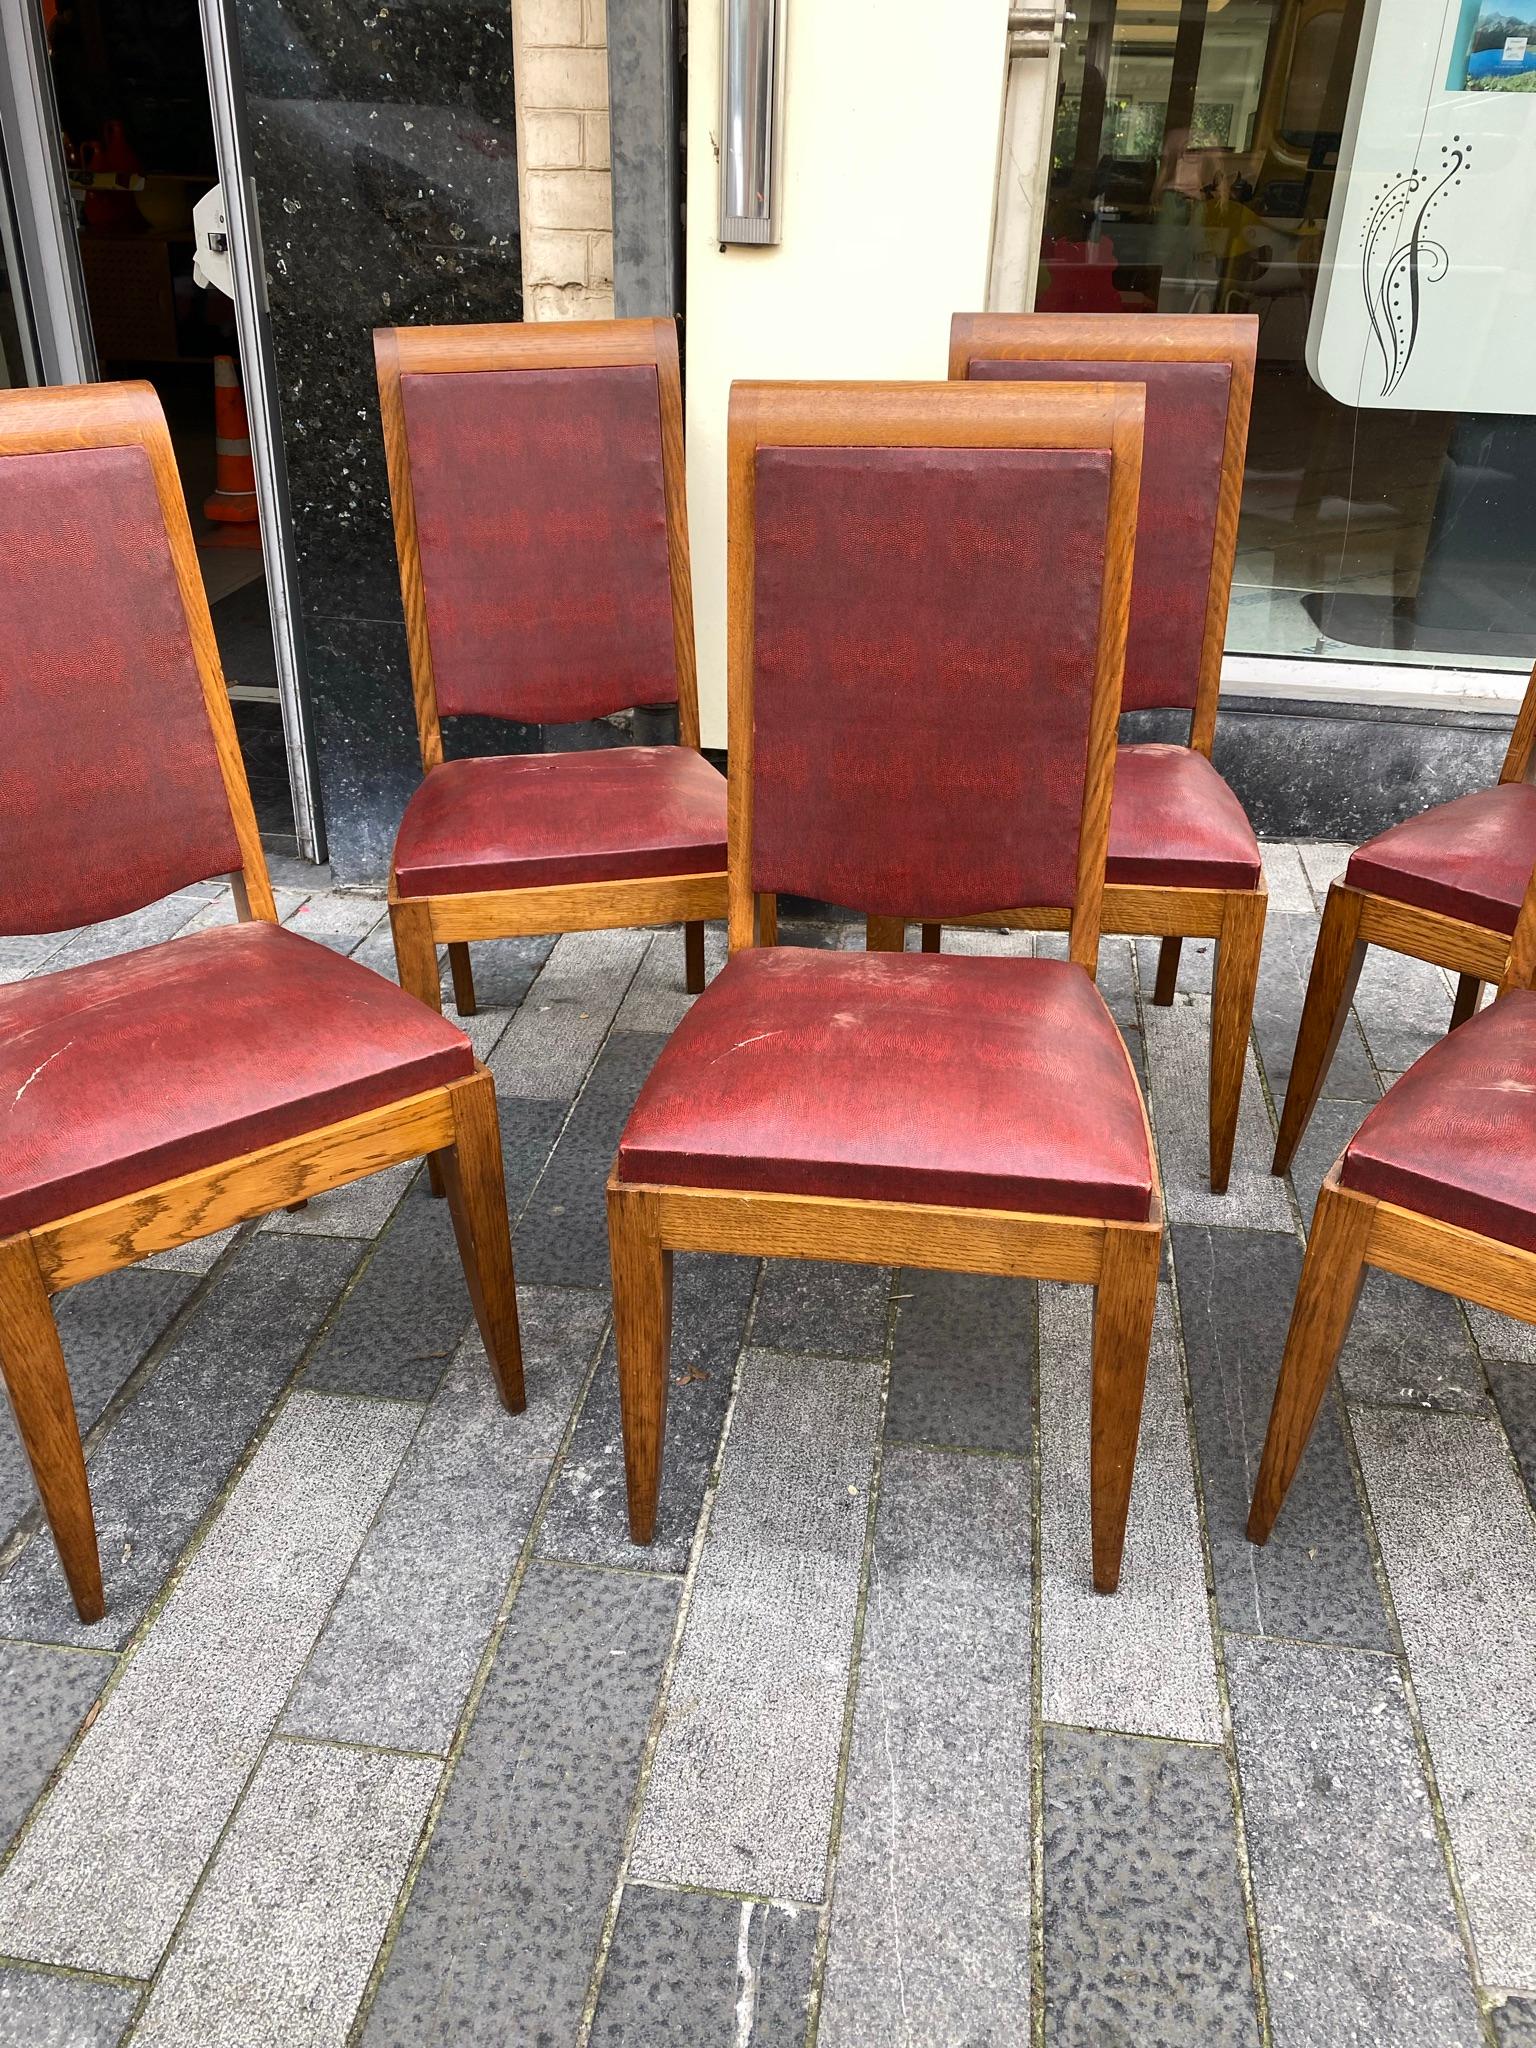 Gaston Poisson, Set of Six Art Deco Chairs in Oak, circa 1930/1940 In Good Condition For Sale In Saint-Ouen, FR